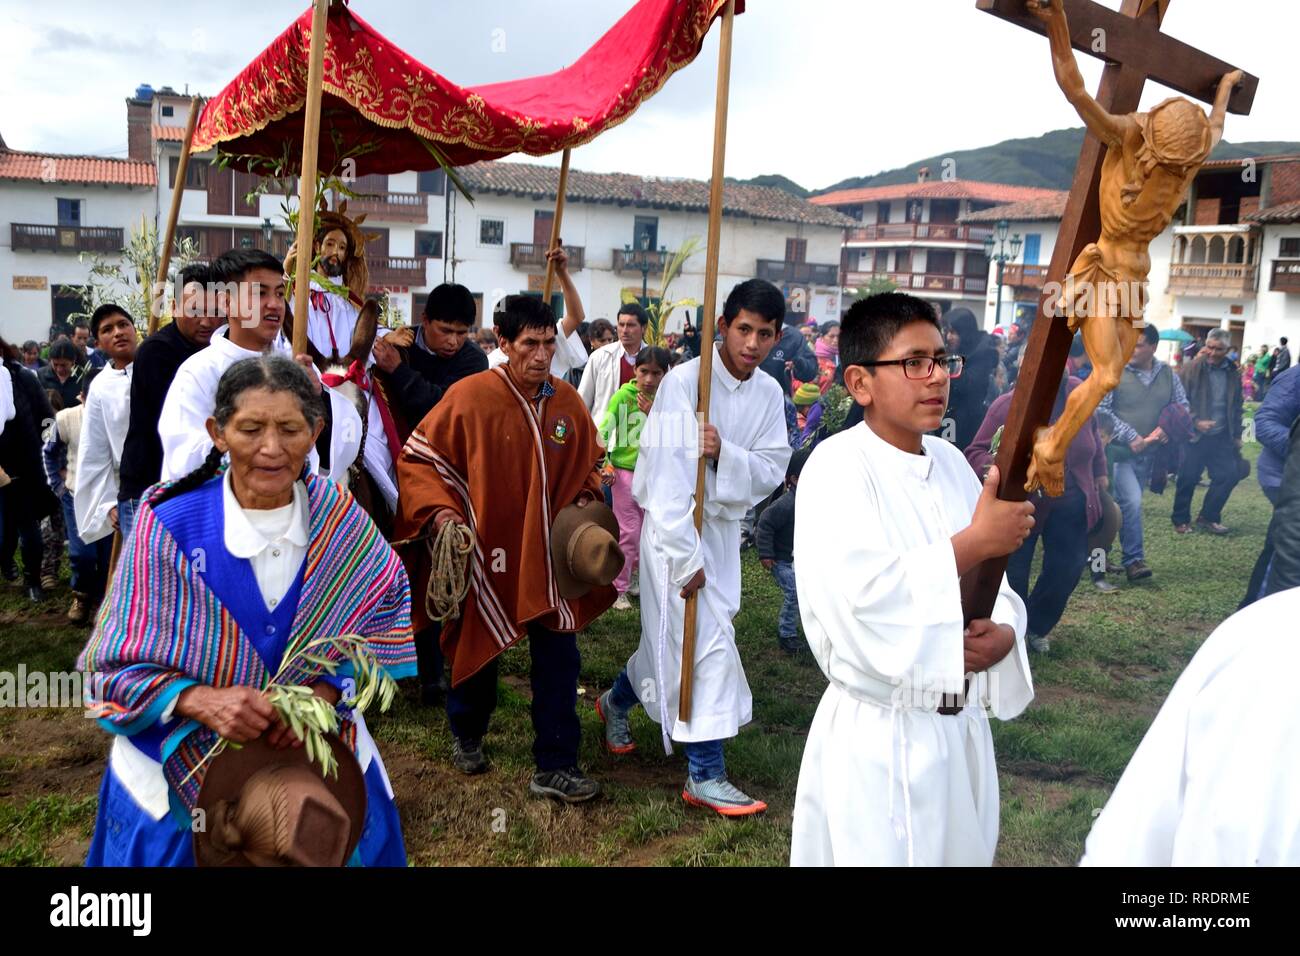 Procession - Palm Sunday in CHACAS - National park HUASCARAN. Department of Ancash.PERU            											  					  			 	  	  			 	    	 Stock Photo